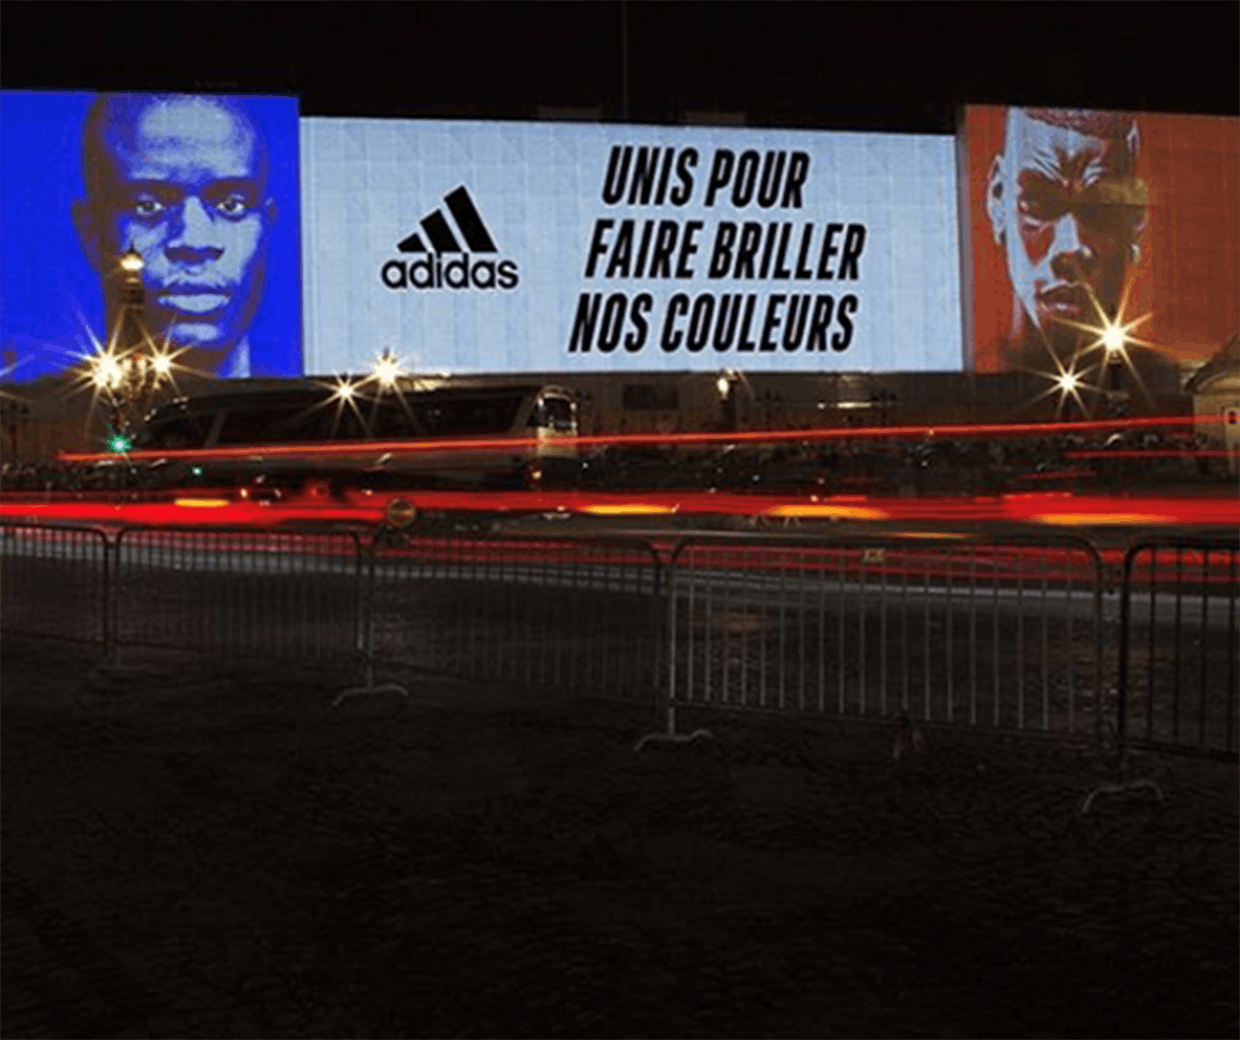 Electricista ballena azul Diligencia Adidas ramps up key city strategy as it makes a play for Paris